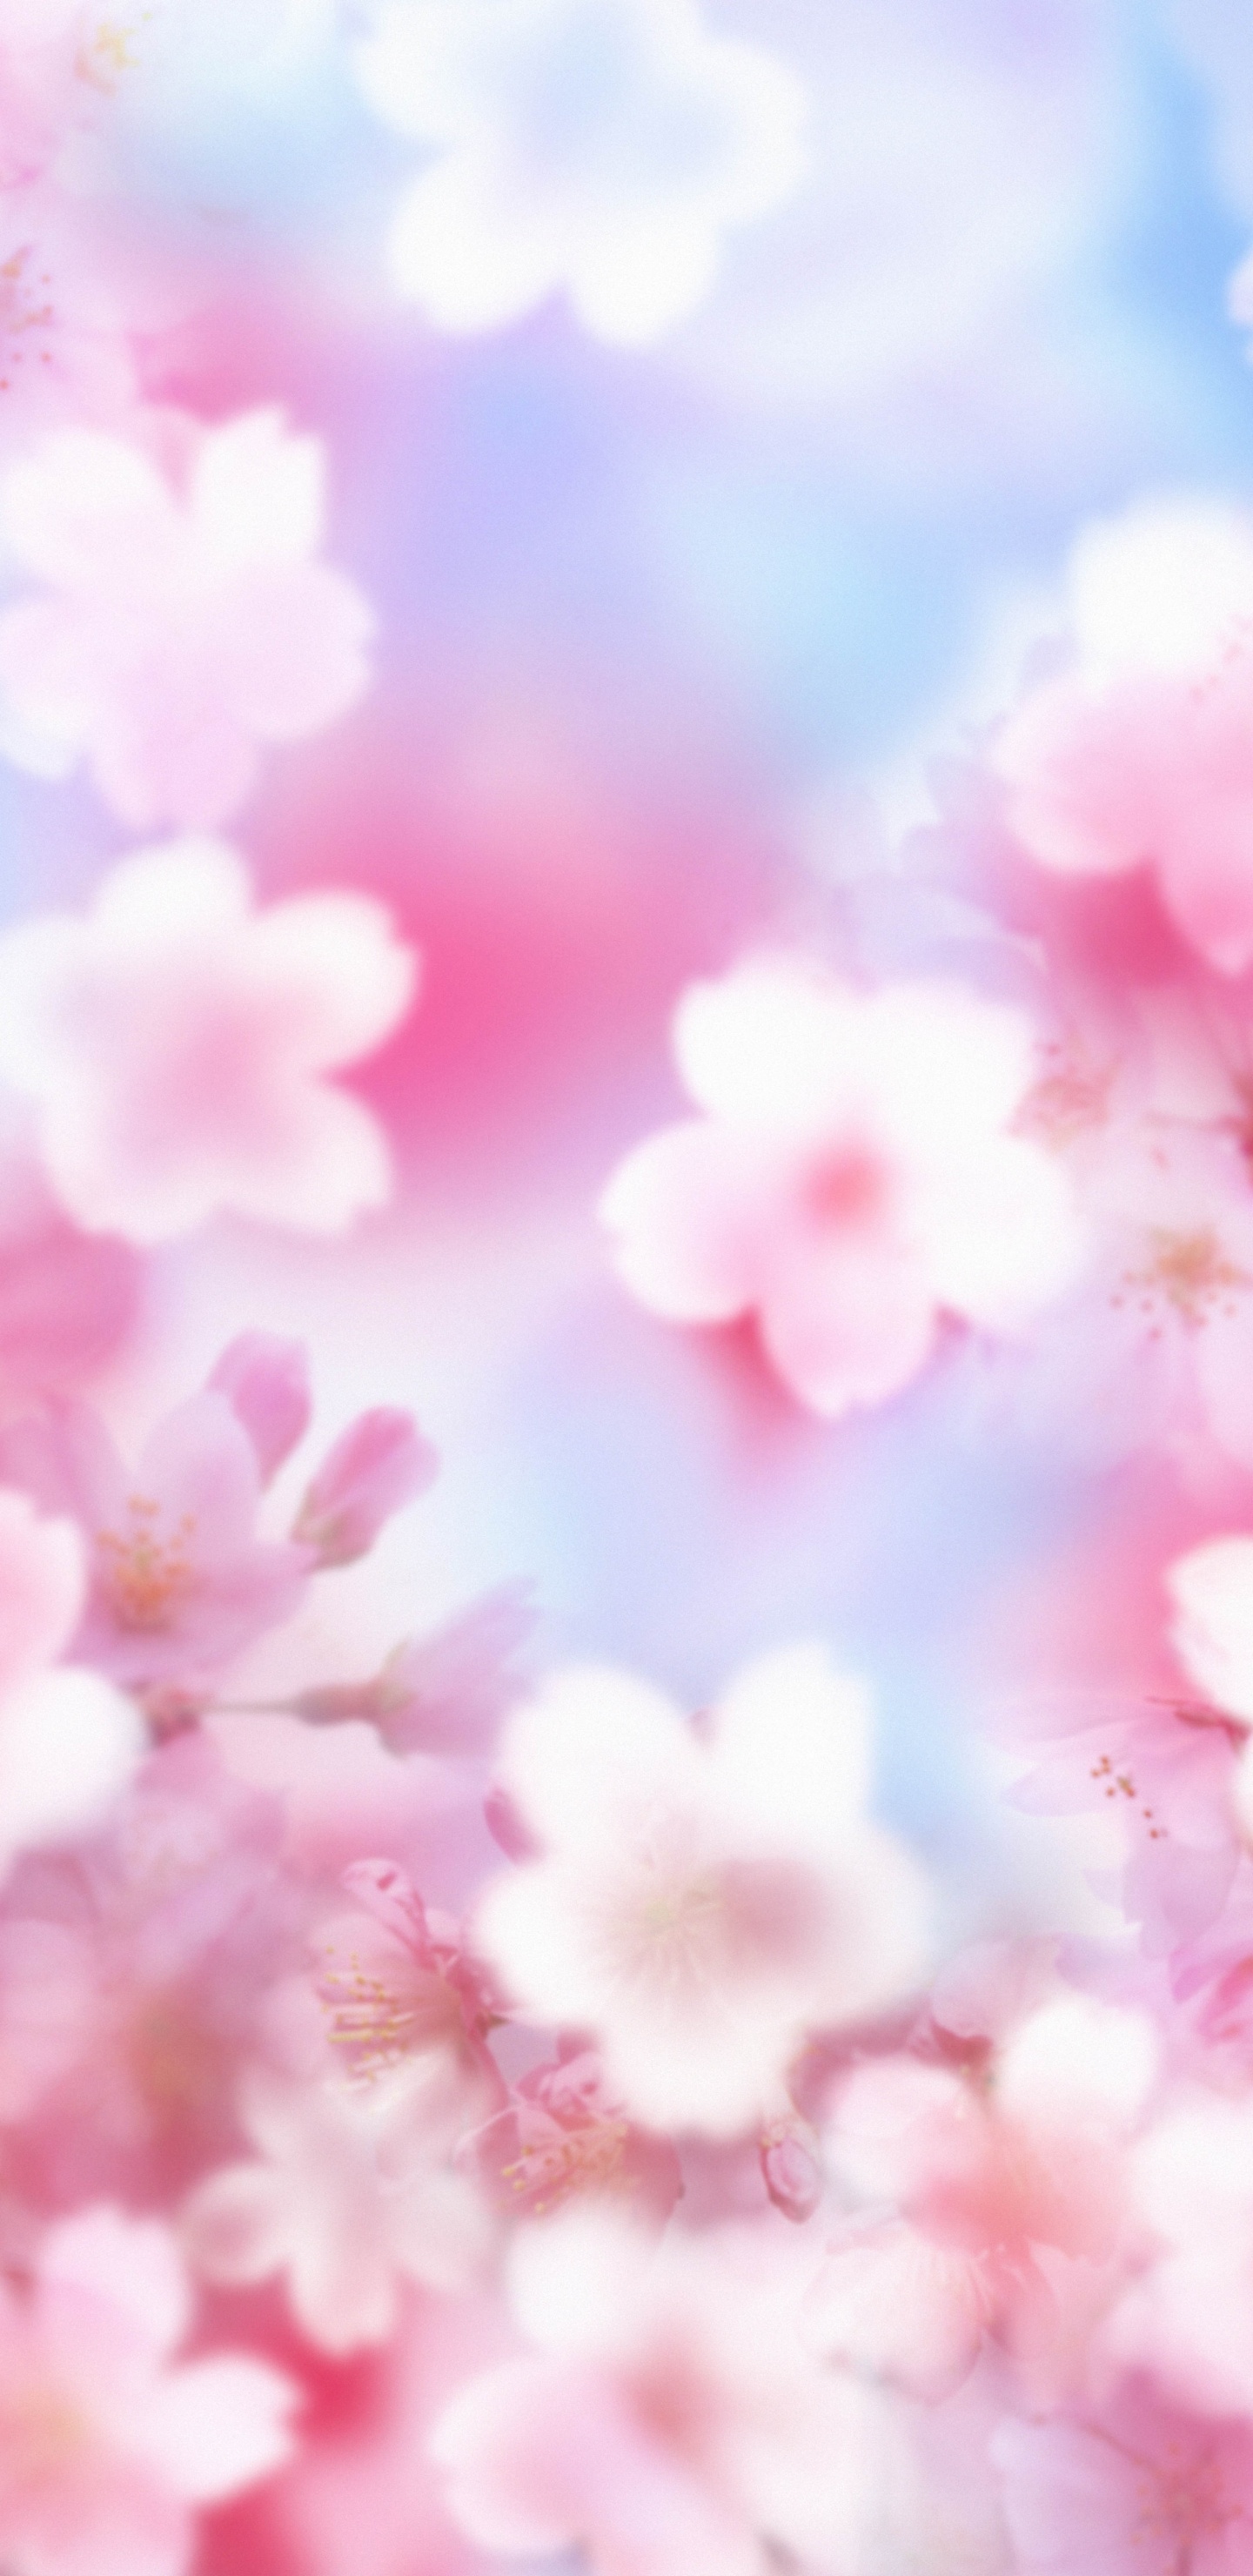 Pink Cherry Blossom Under Blue Sky During Daytime. Wallpaper in 1440x2960 Resolution